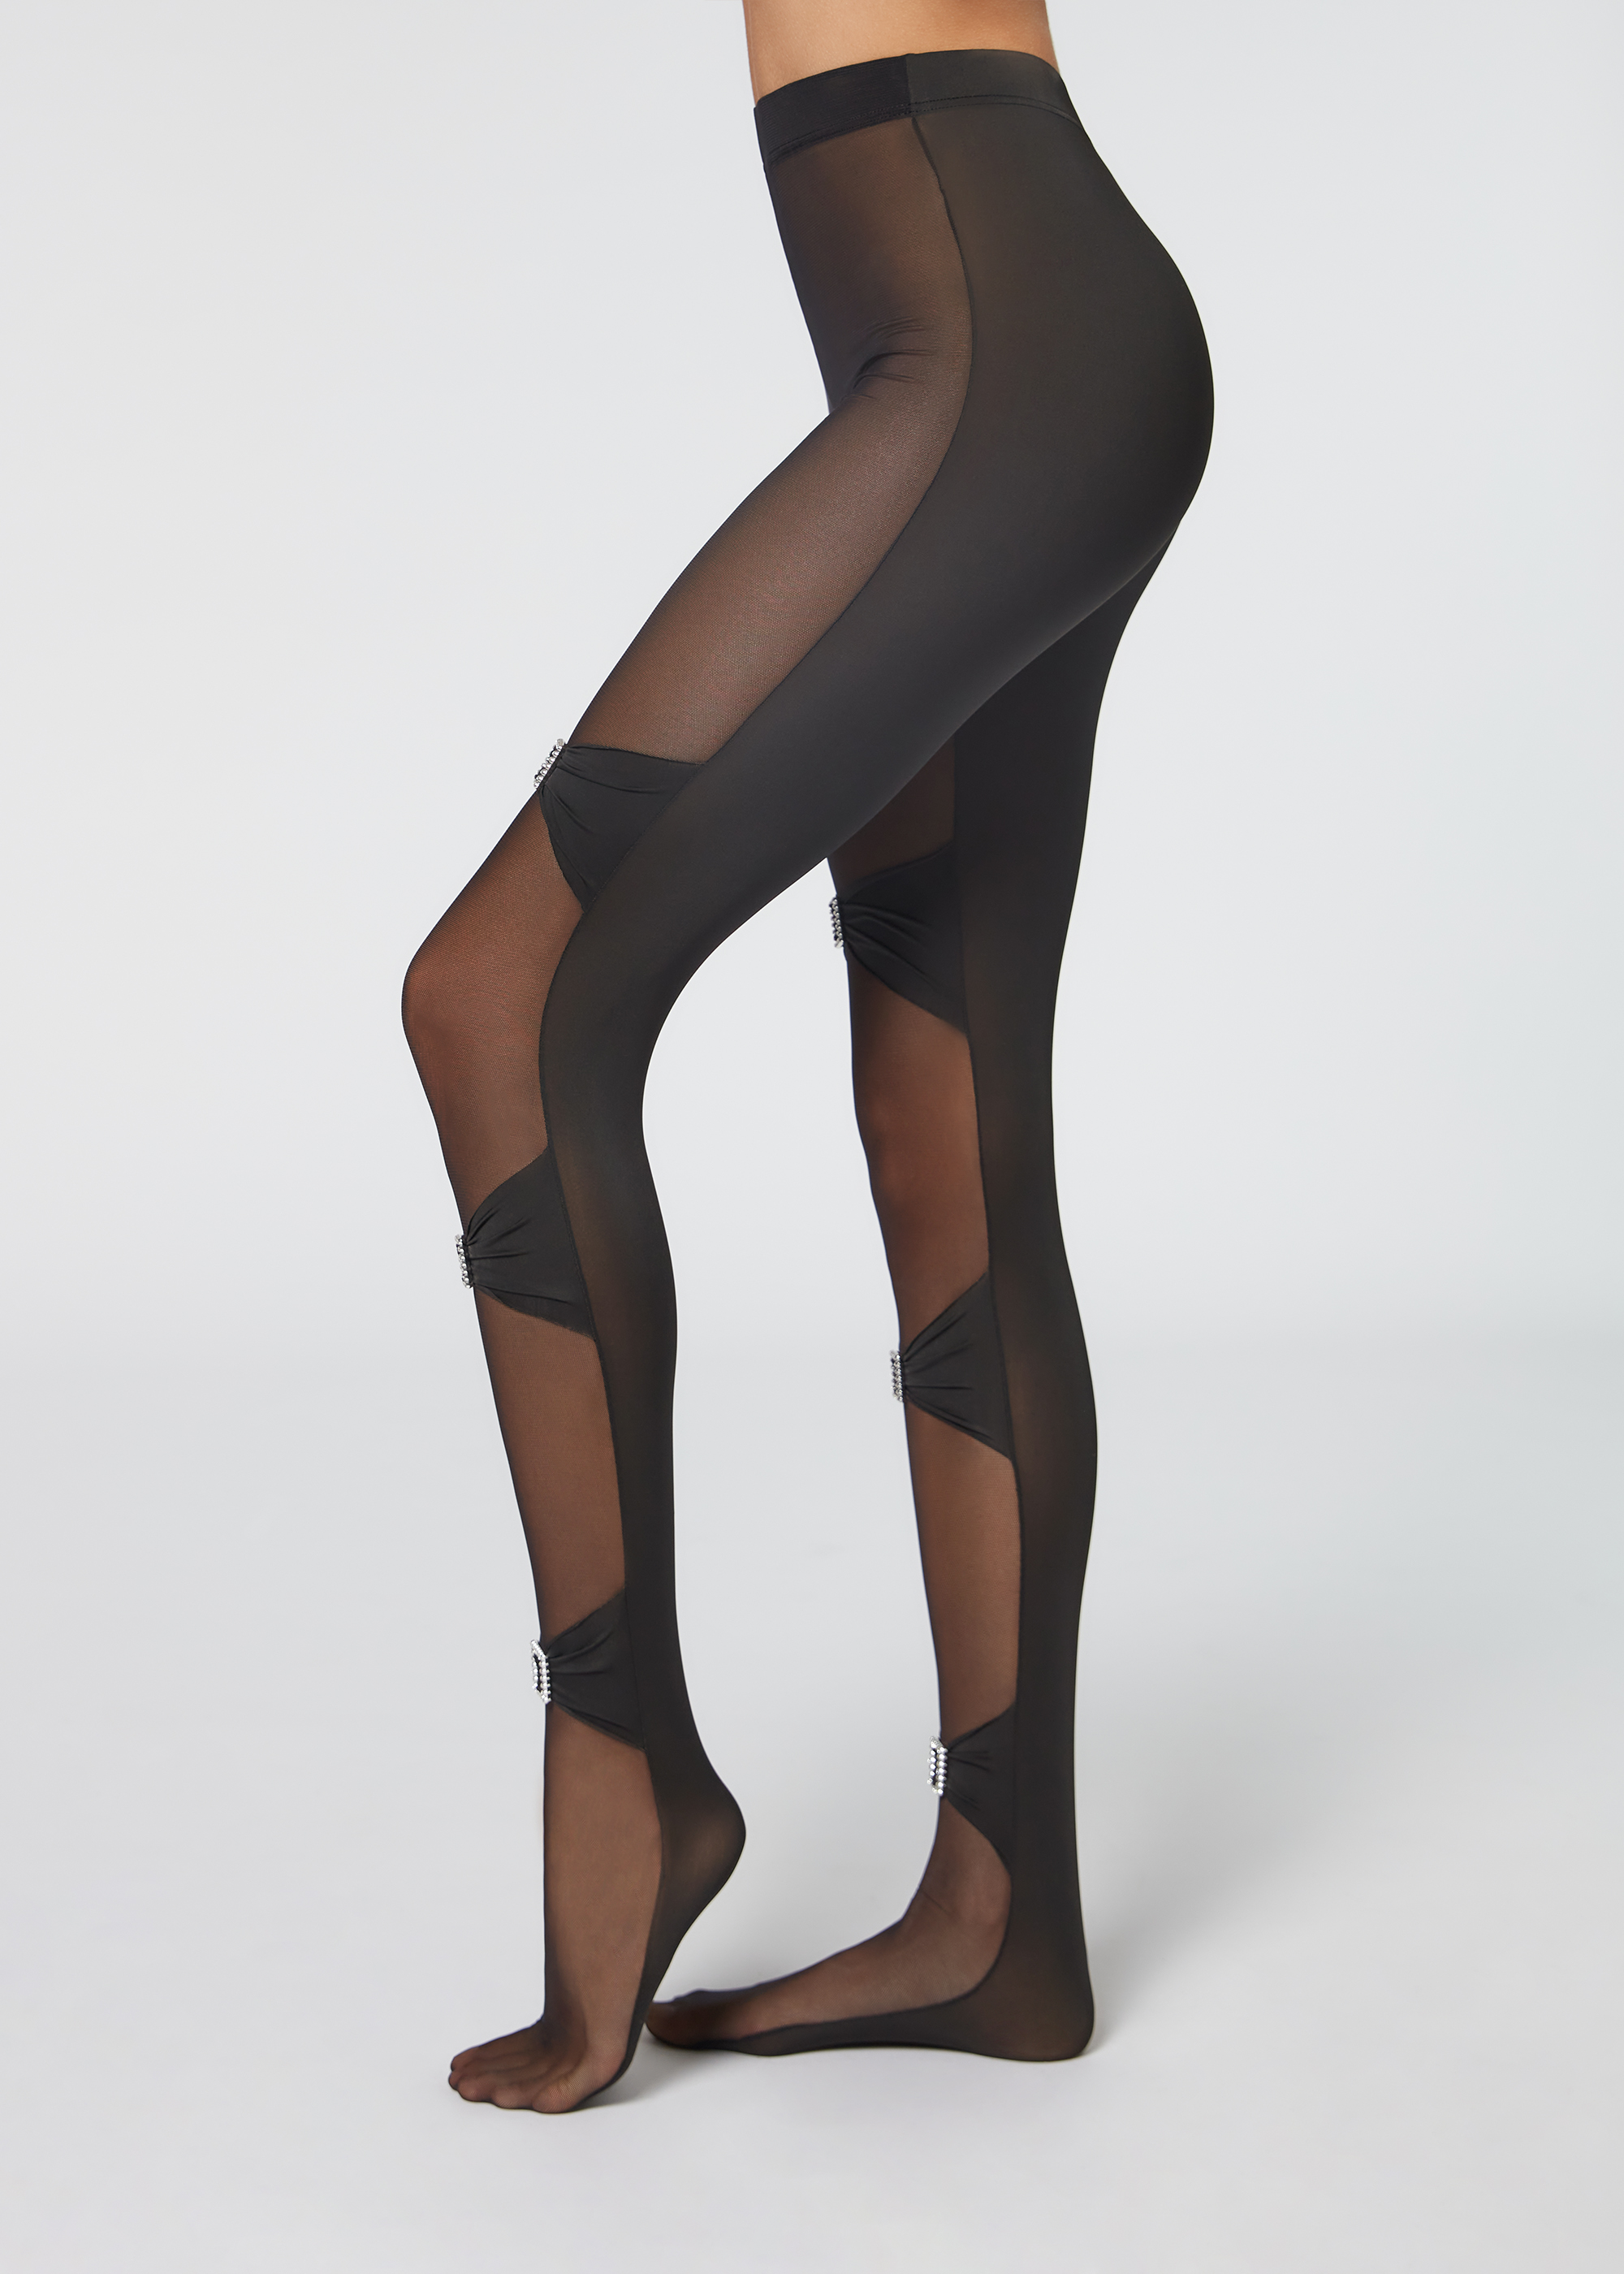 Curly Trim Tights with Rhinestone Buckle Motif - Calzedonia